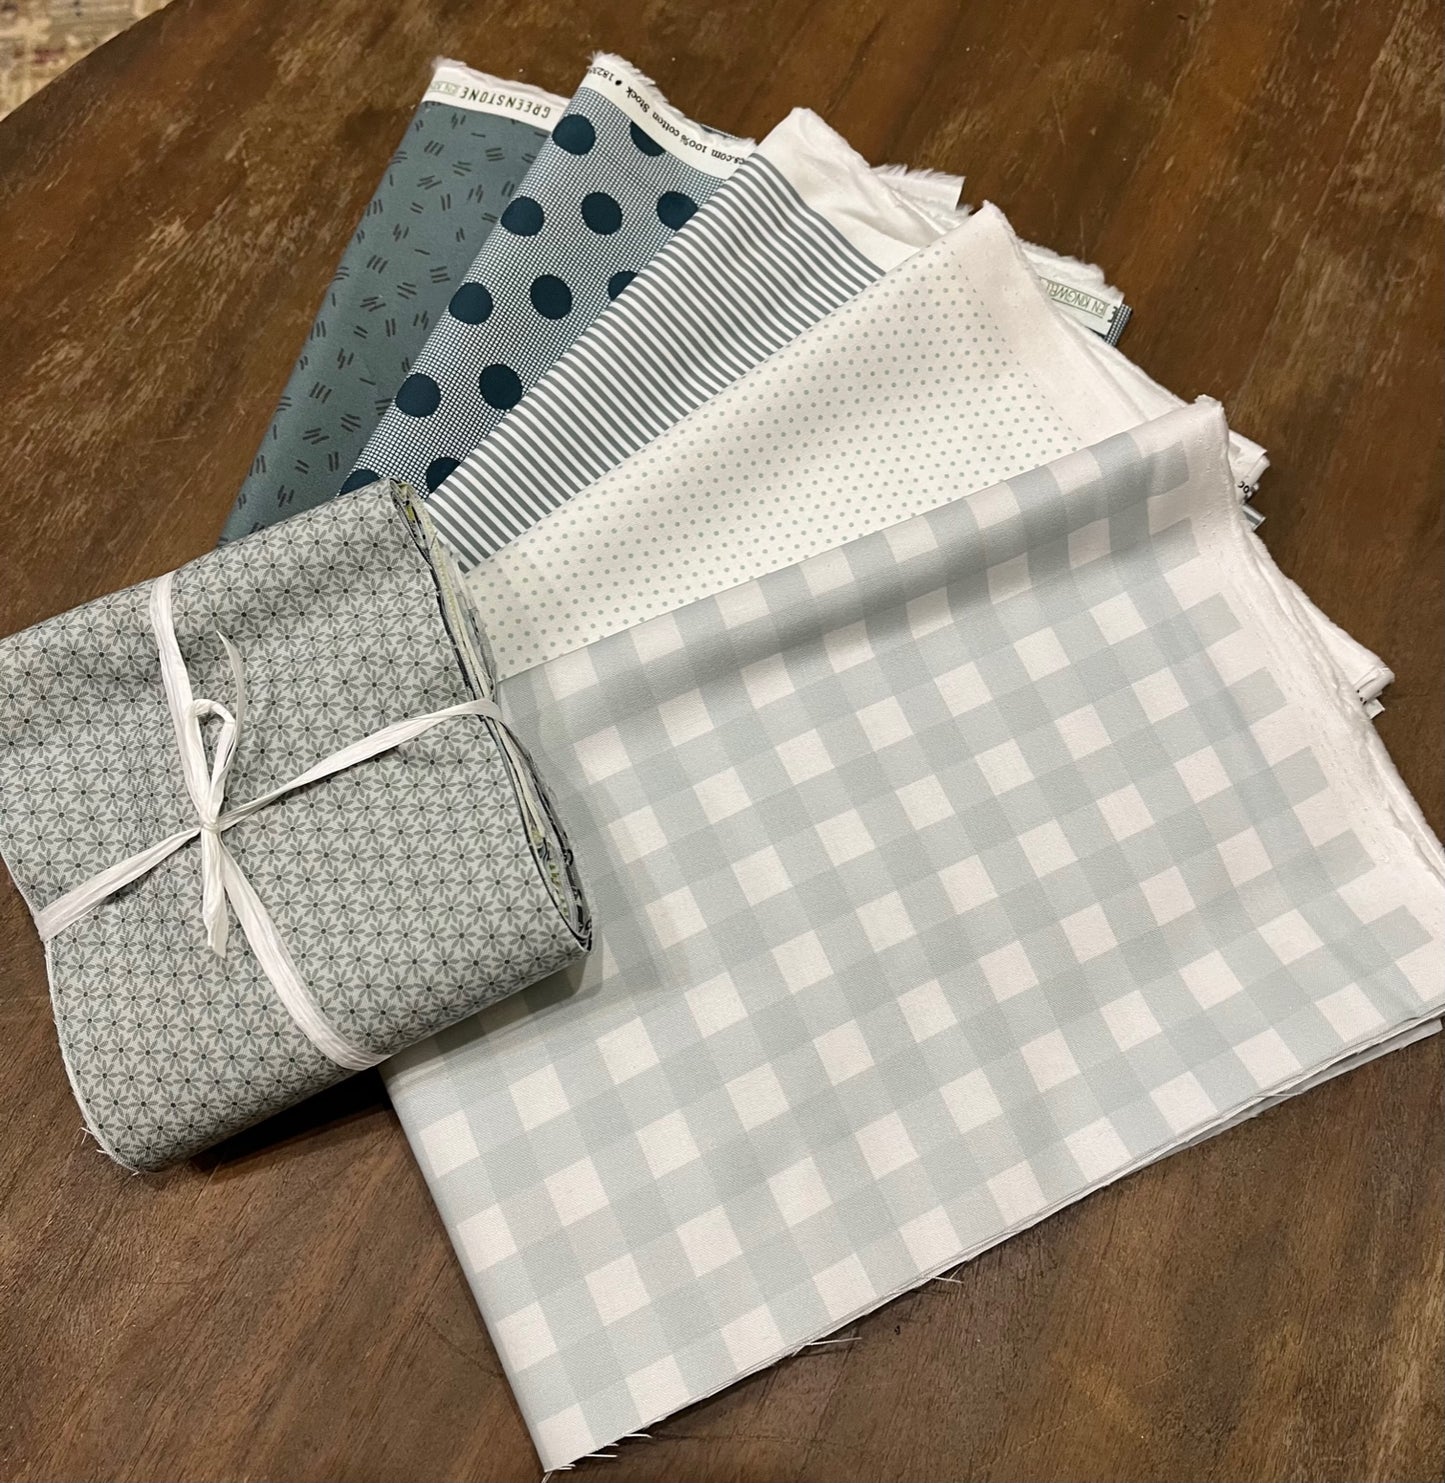 Moving the Line Quilt Kit using Greenstone by Jen Kingwell